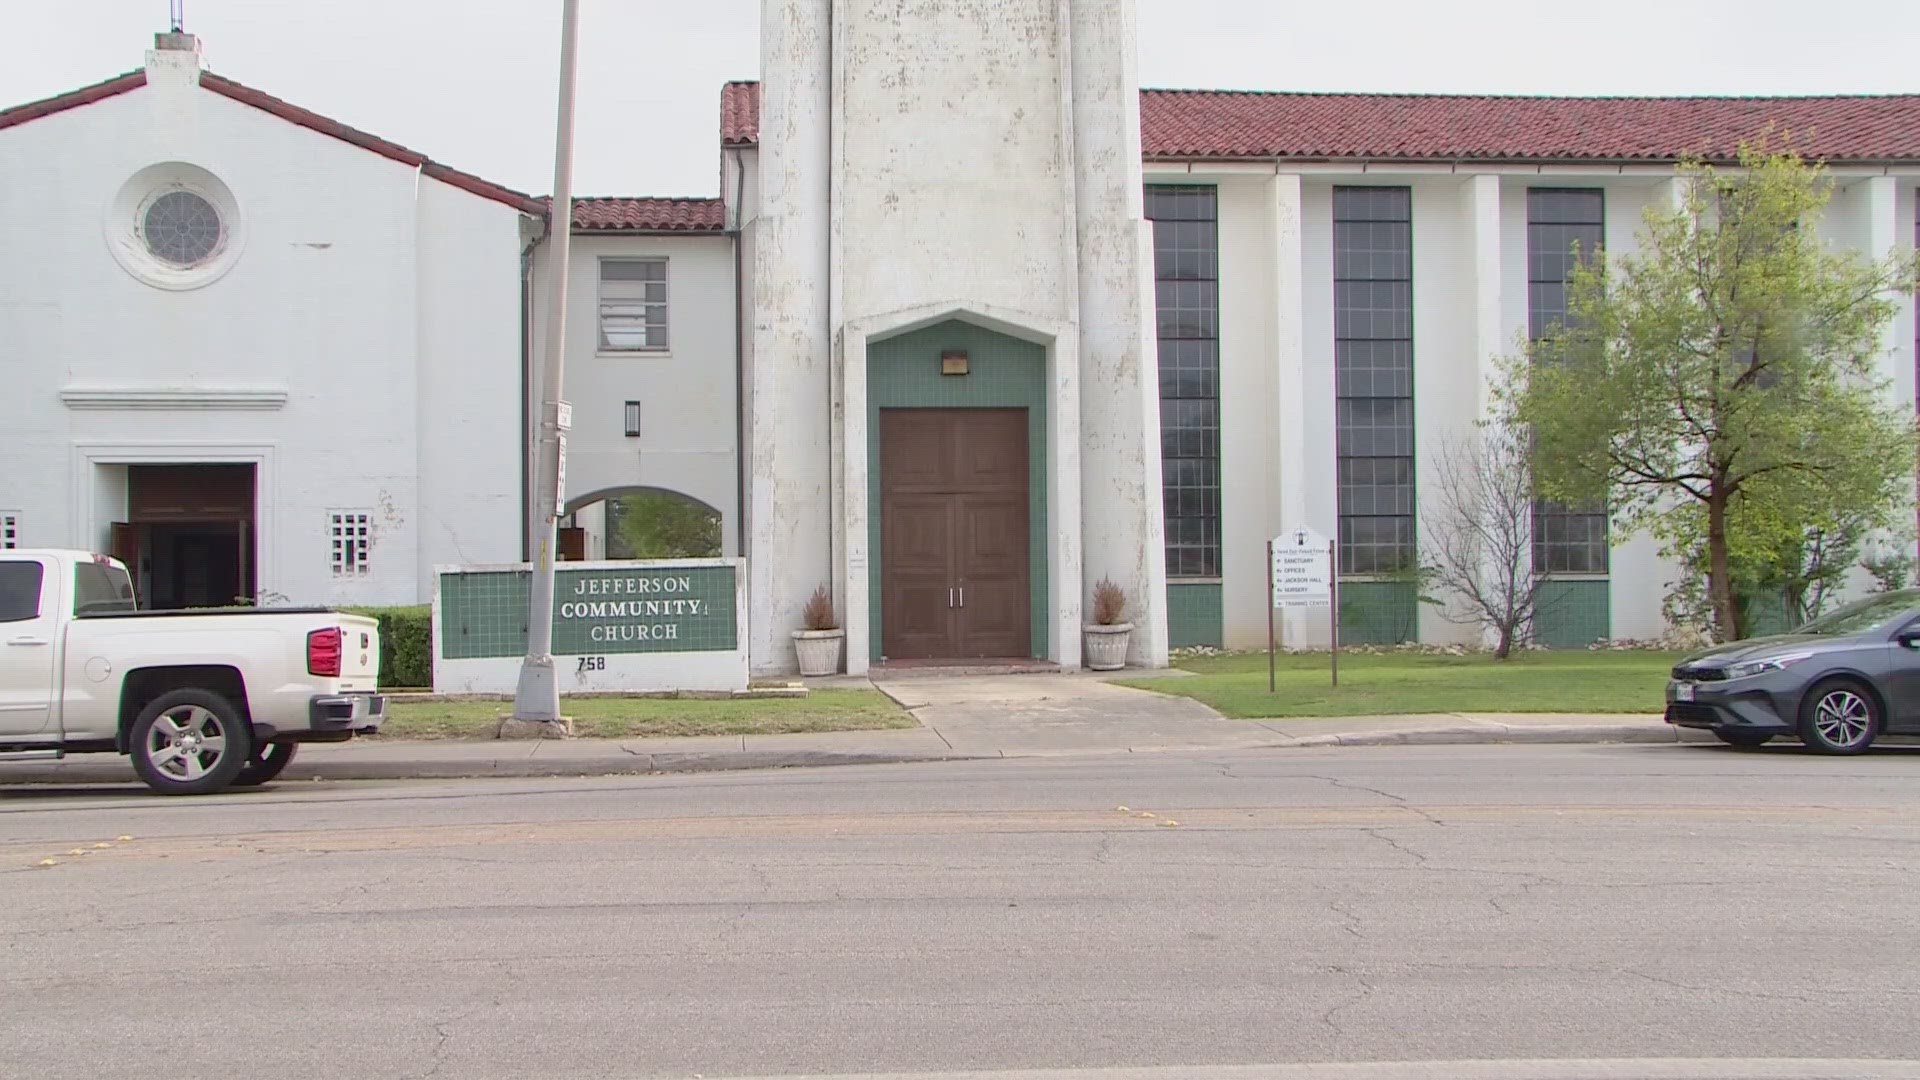 The Jefferson Community Church held its last Easter service on Sunday and closed its doors indefinitely after years of financial hardship.